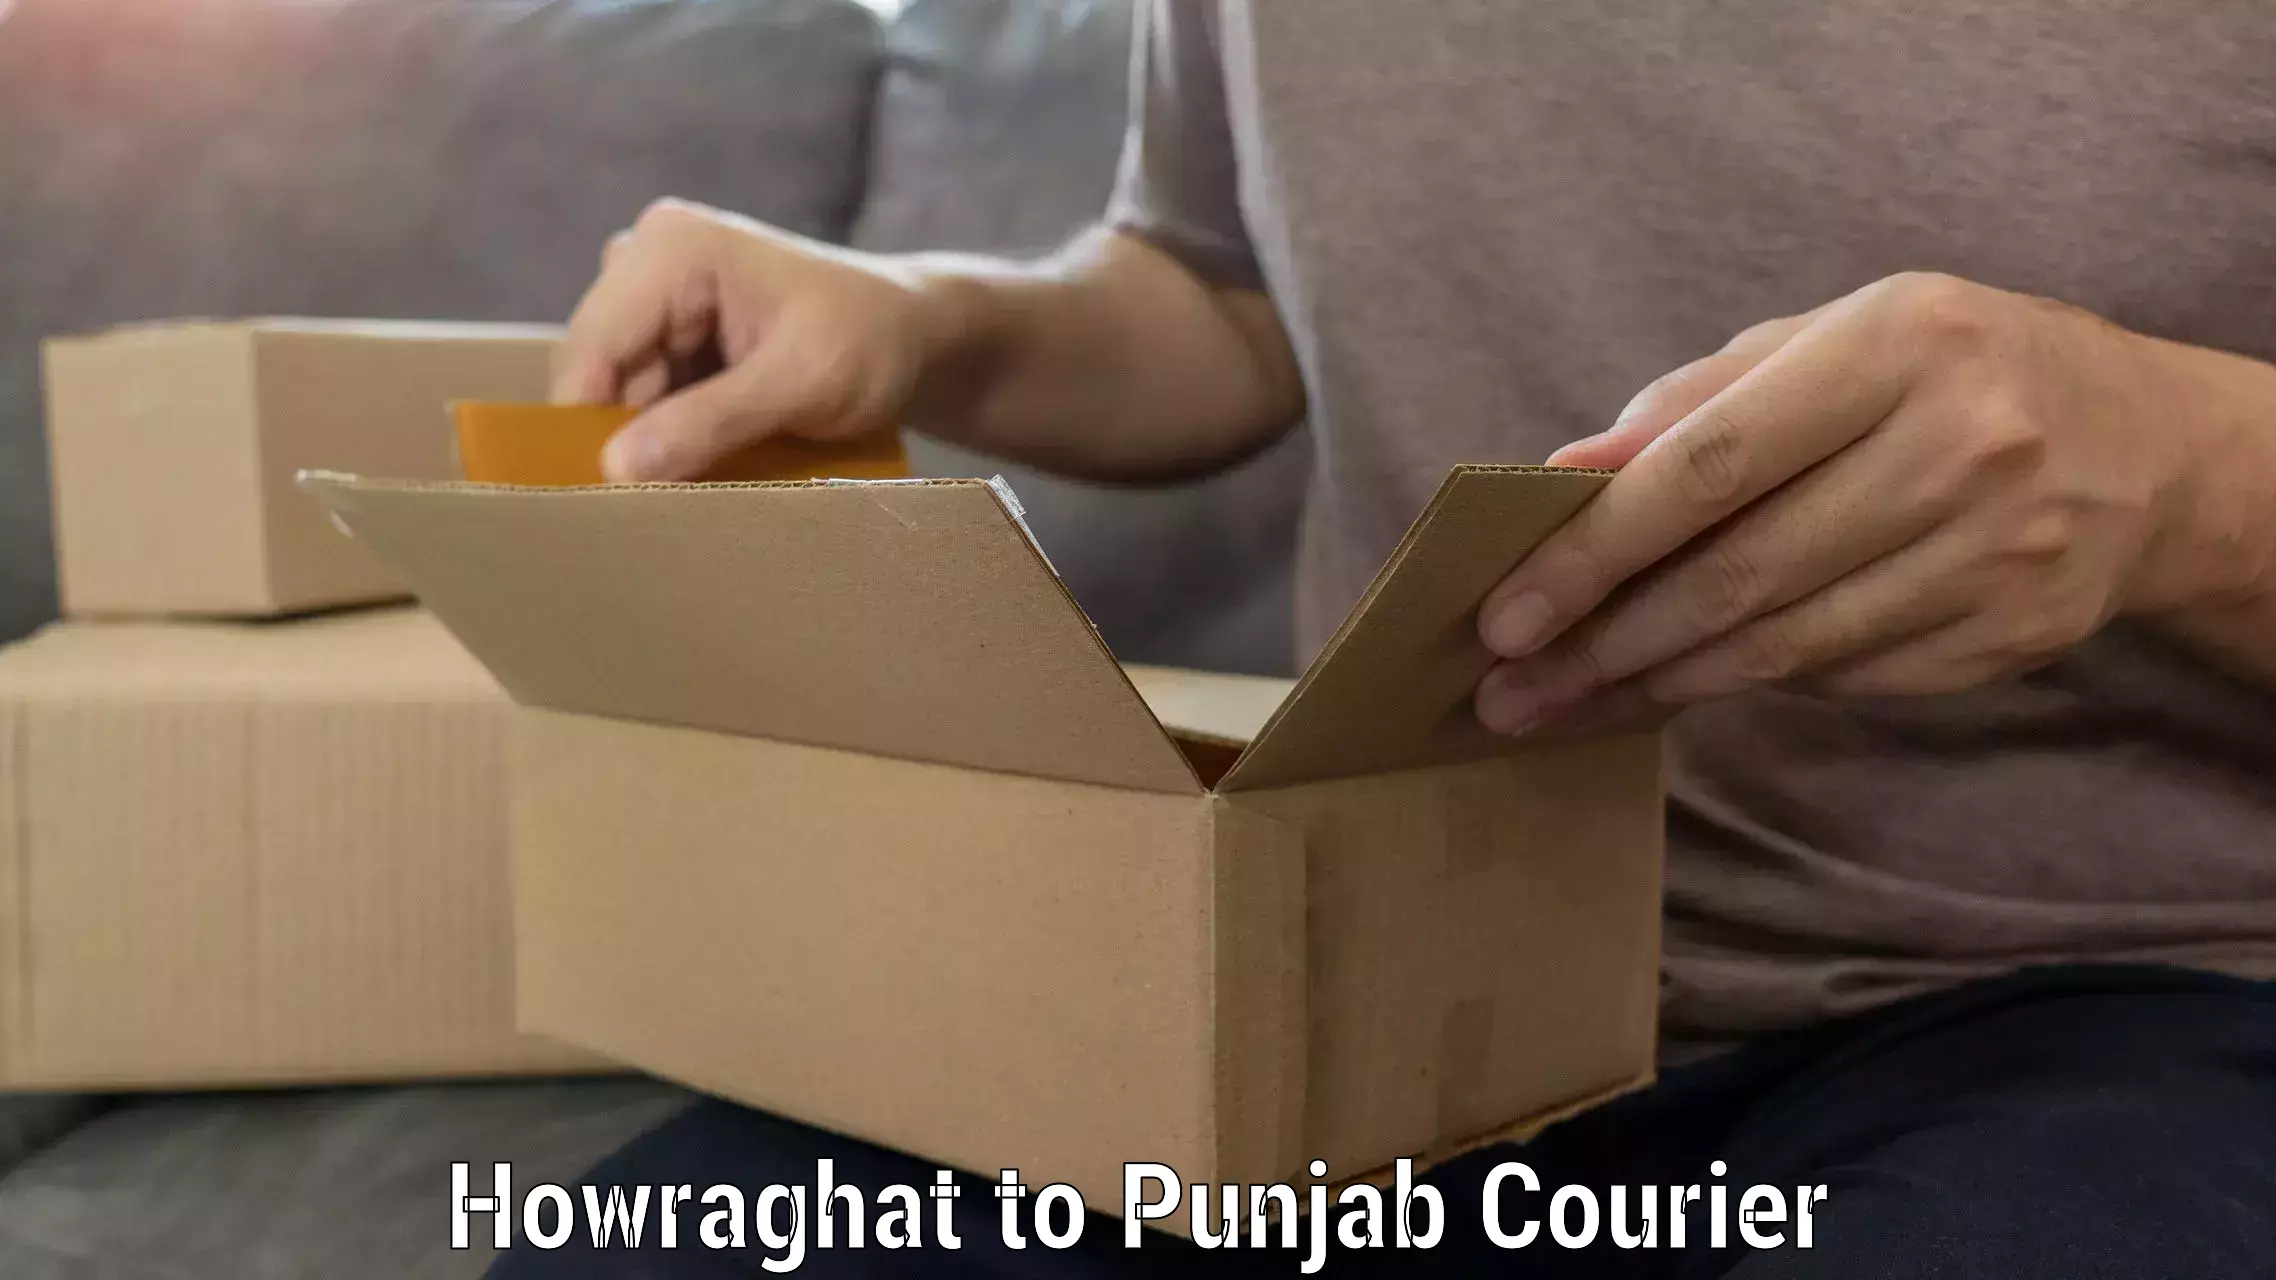 Affordable relocation services Howraghat to Tarn Taran Sahib